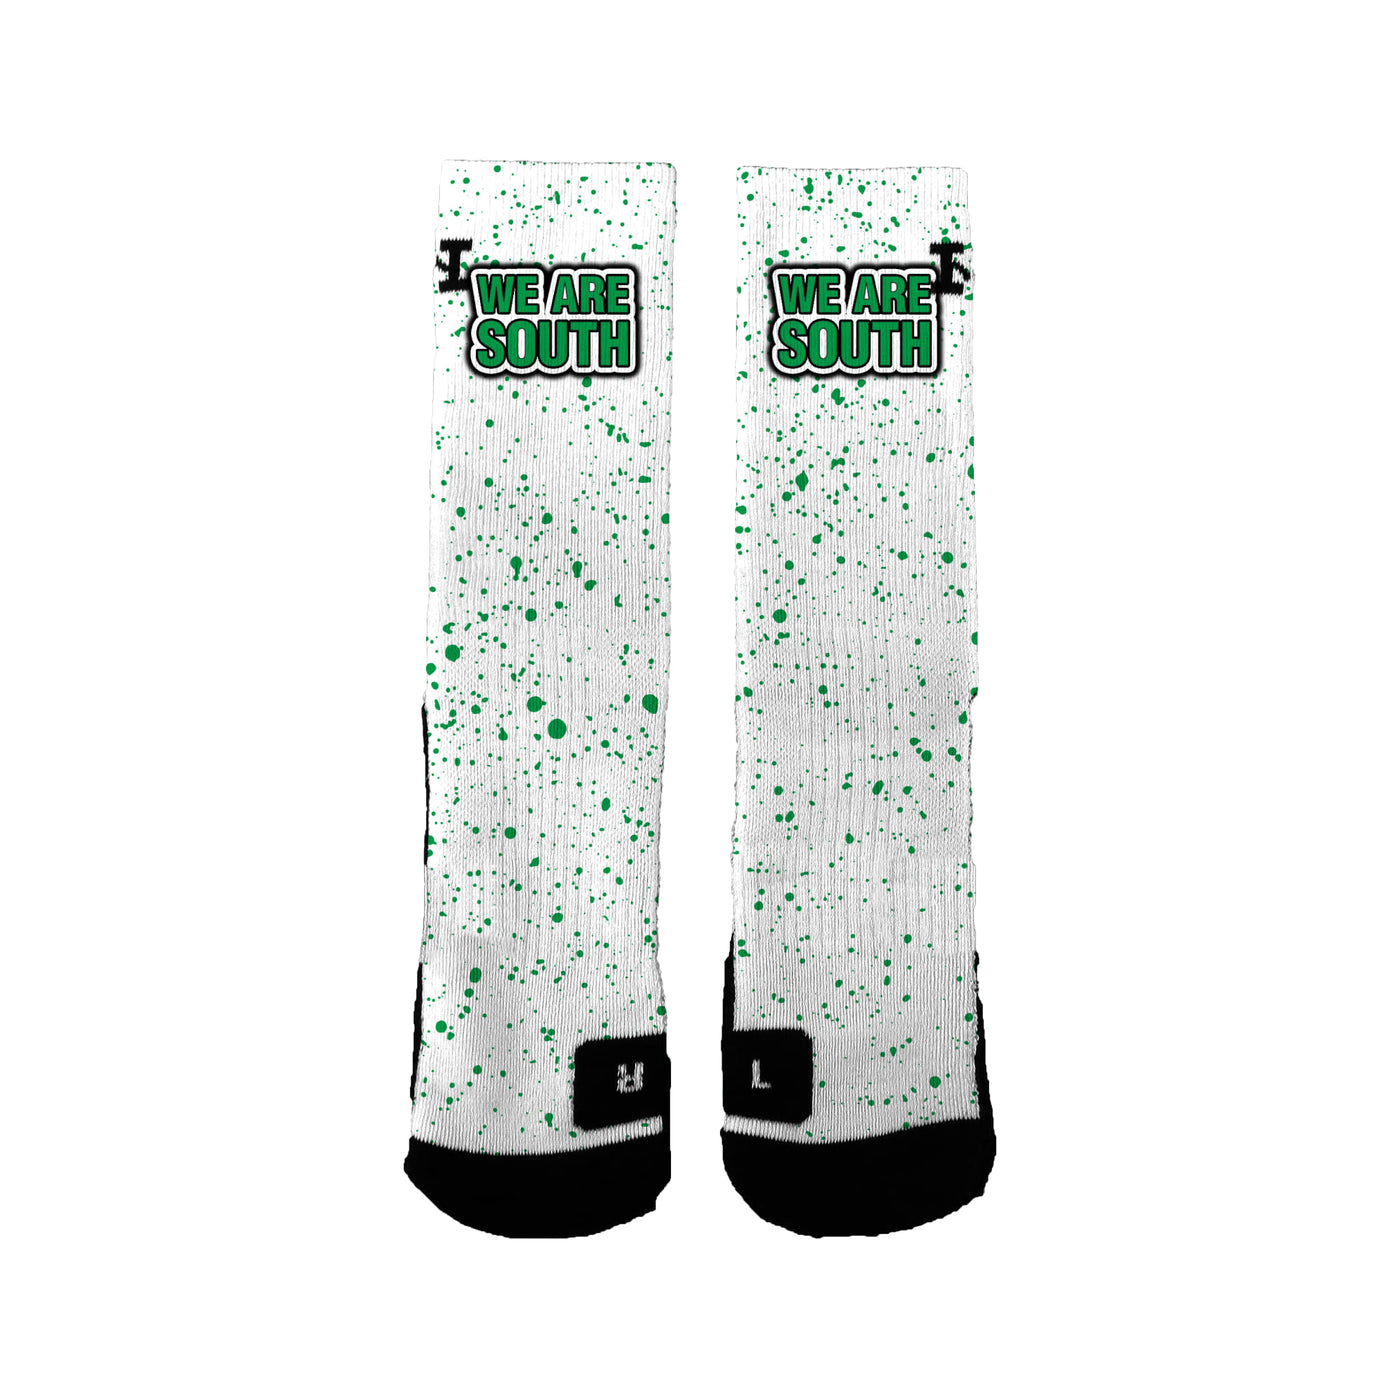 South Middle School Cement Socks